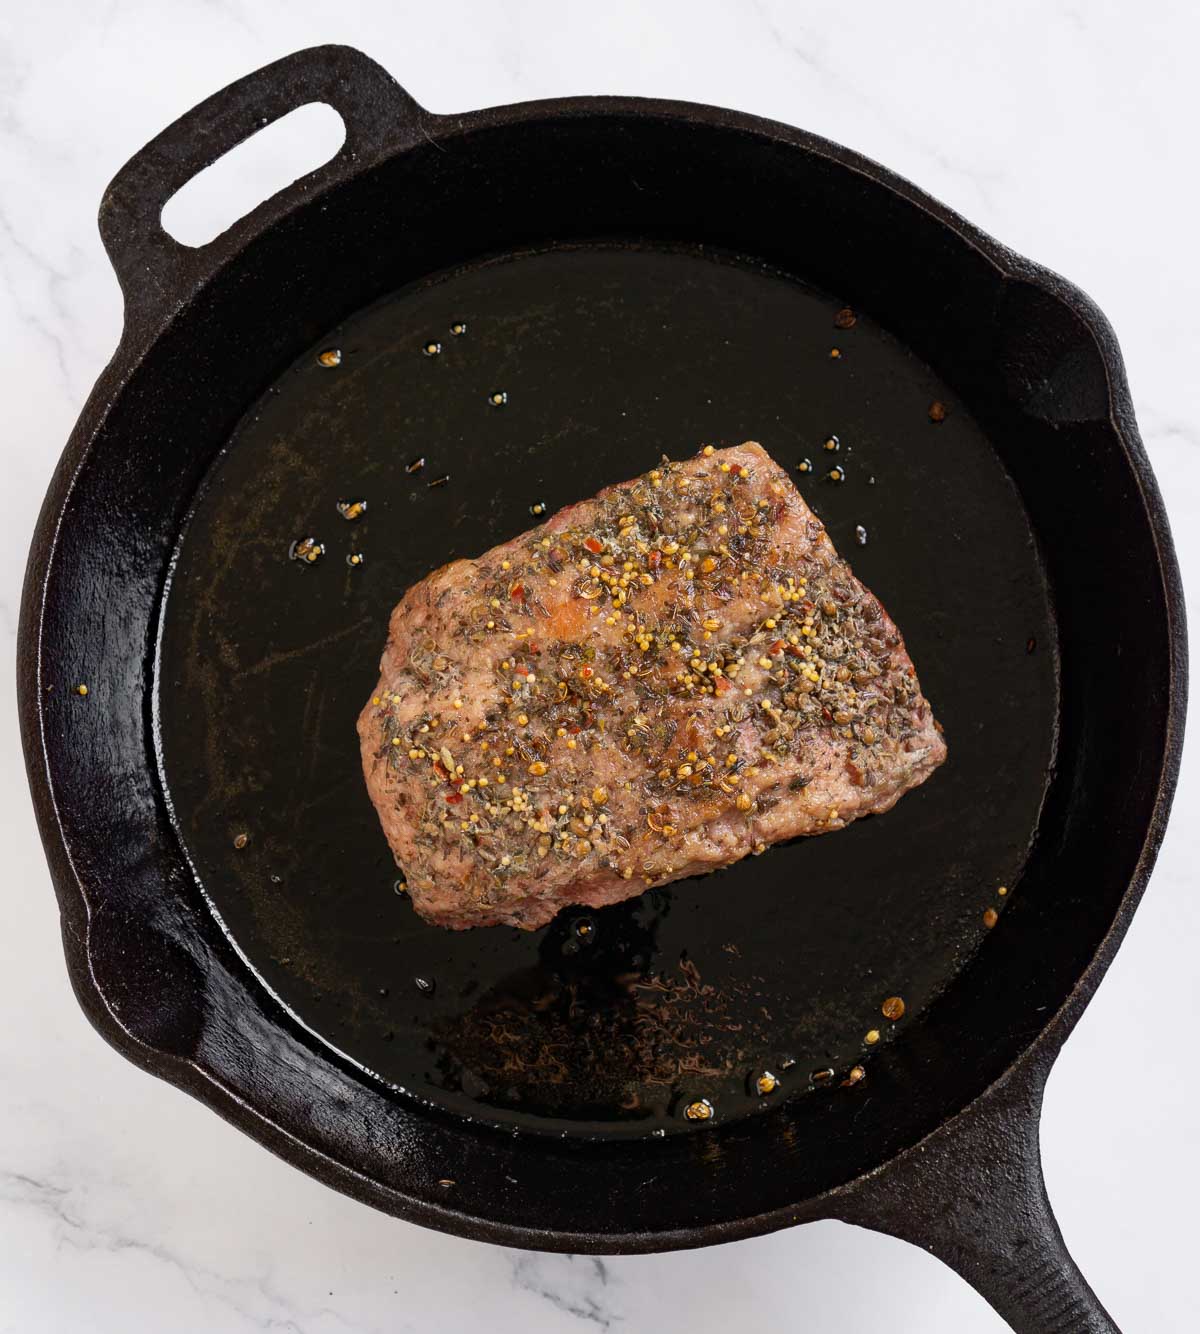 Browning a sous vide corned beef brisket in a skillet